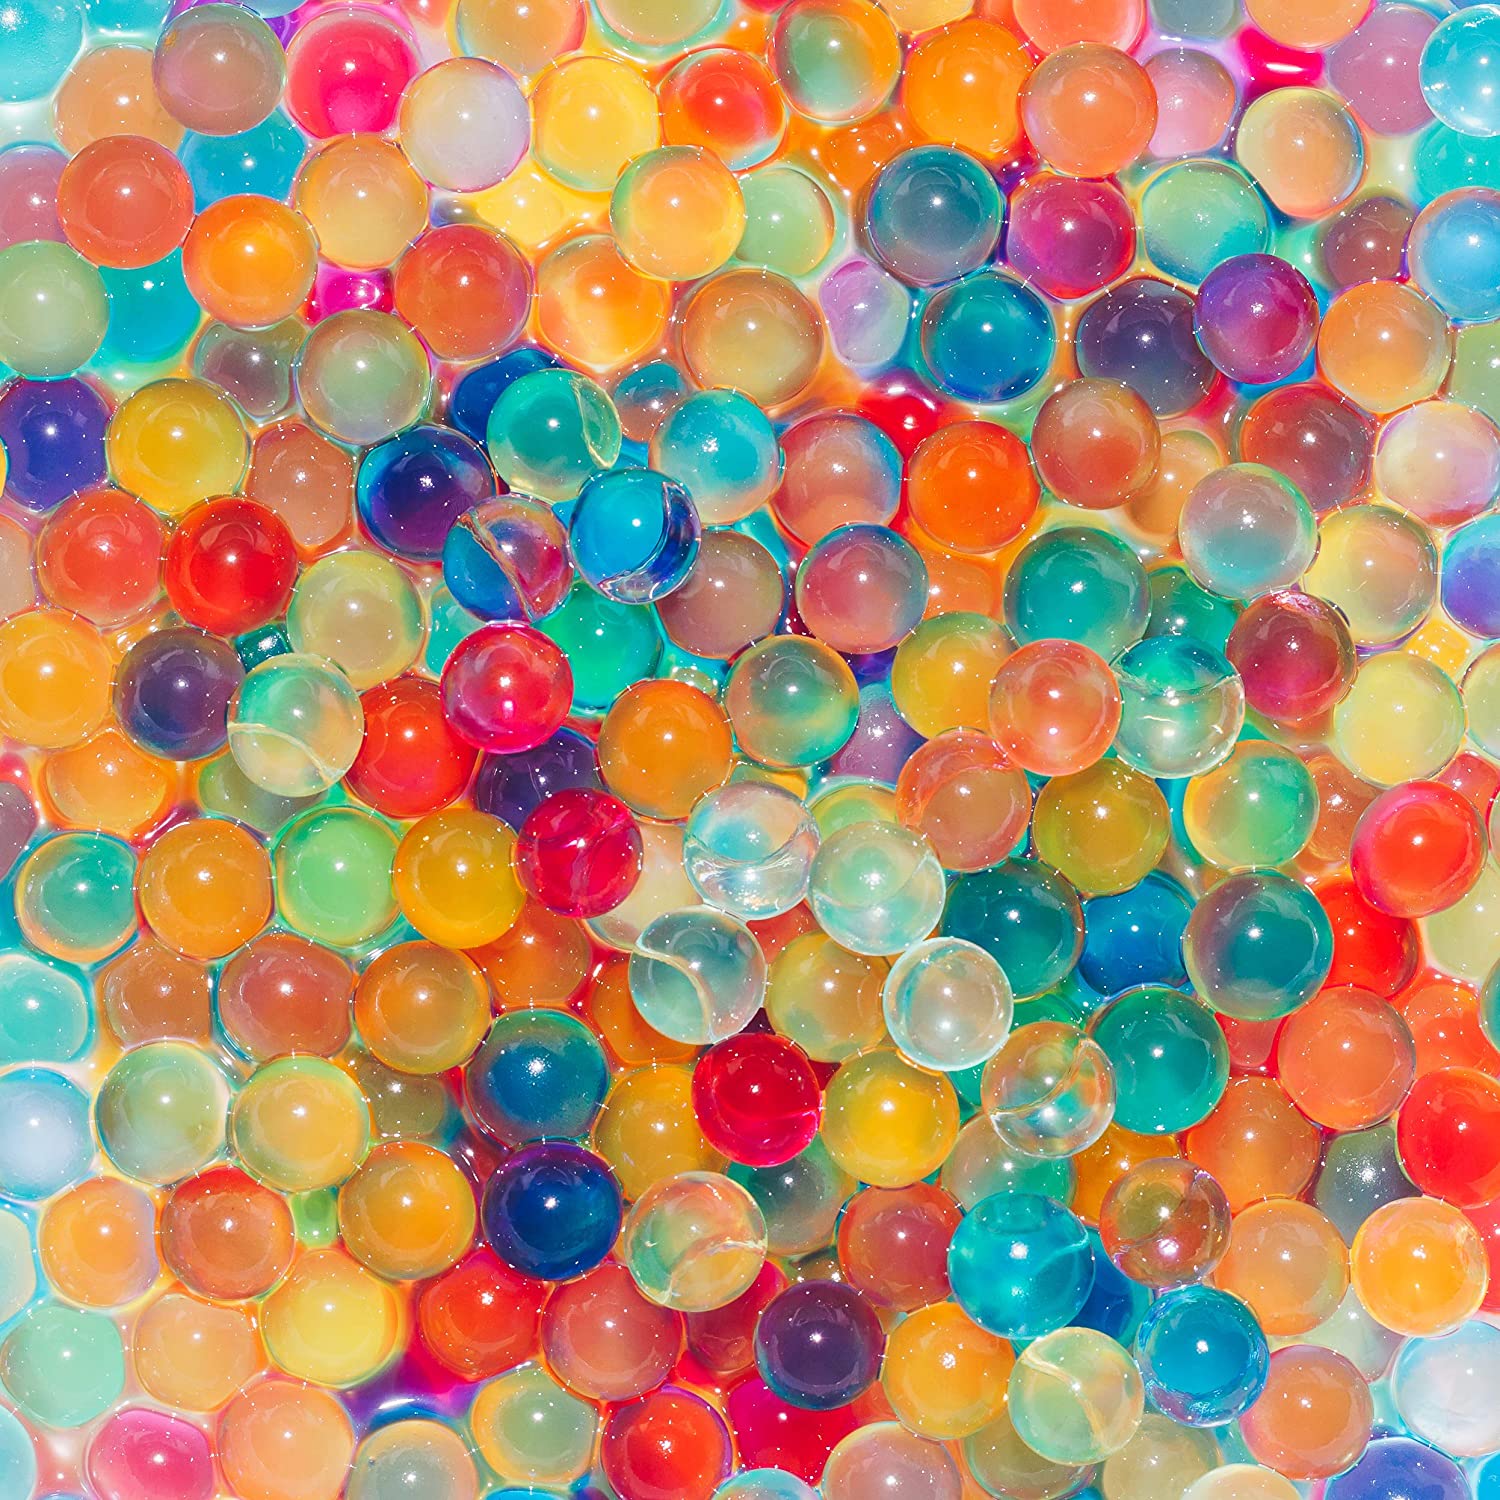 Buy 20,000 Rainbow Water Beads for Kids Non Toxic - Water Table